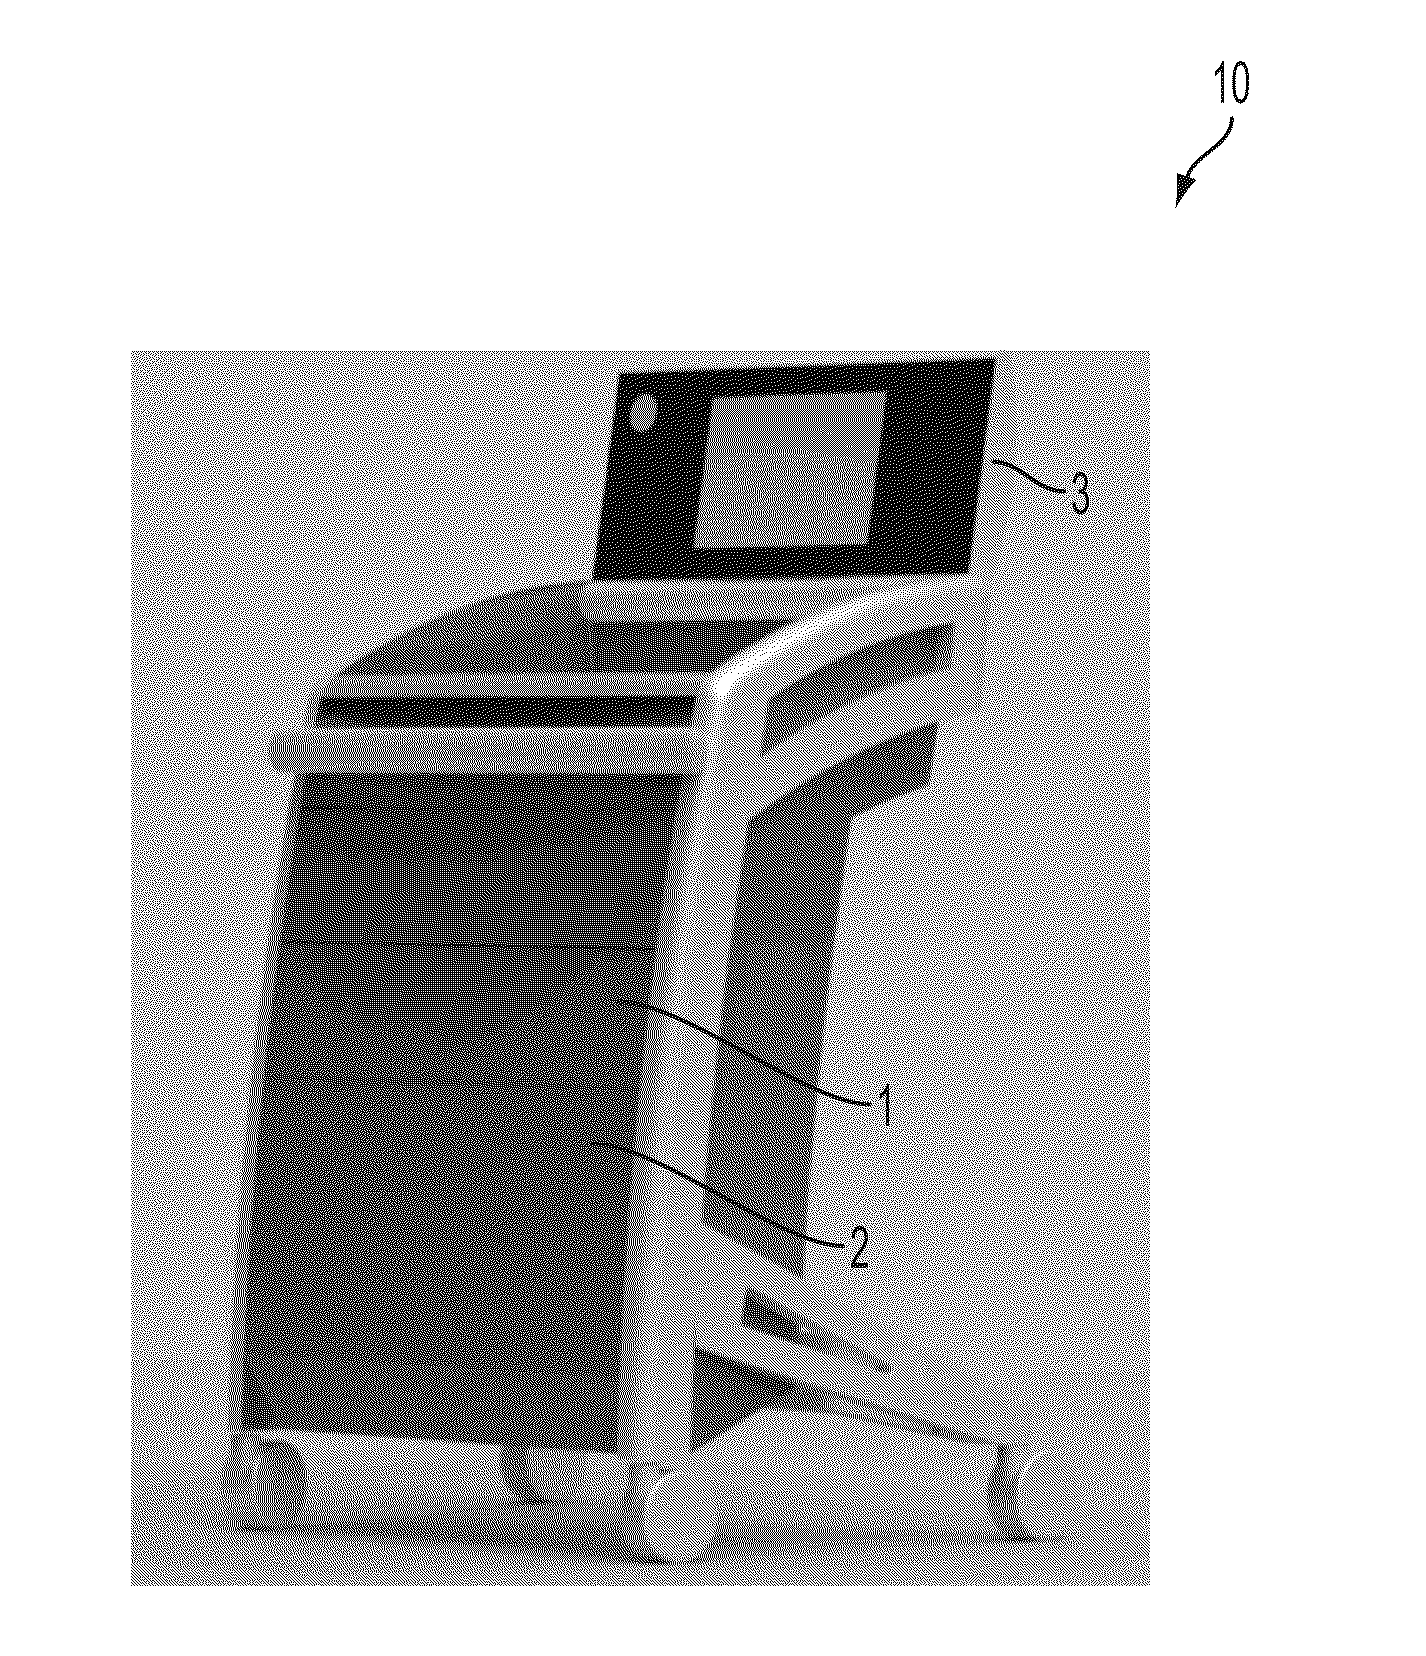 Automated work station for point-of-care cell and biological fluid processing